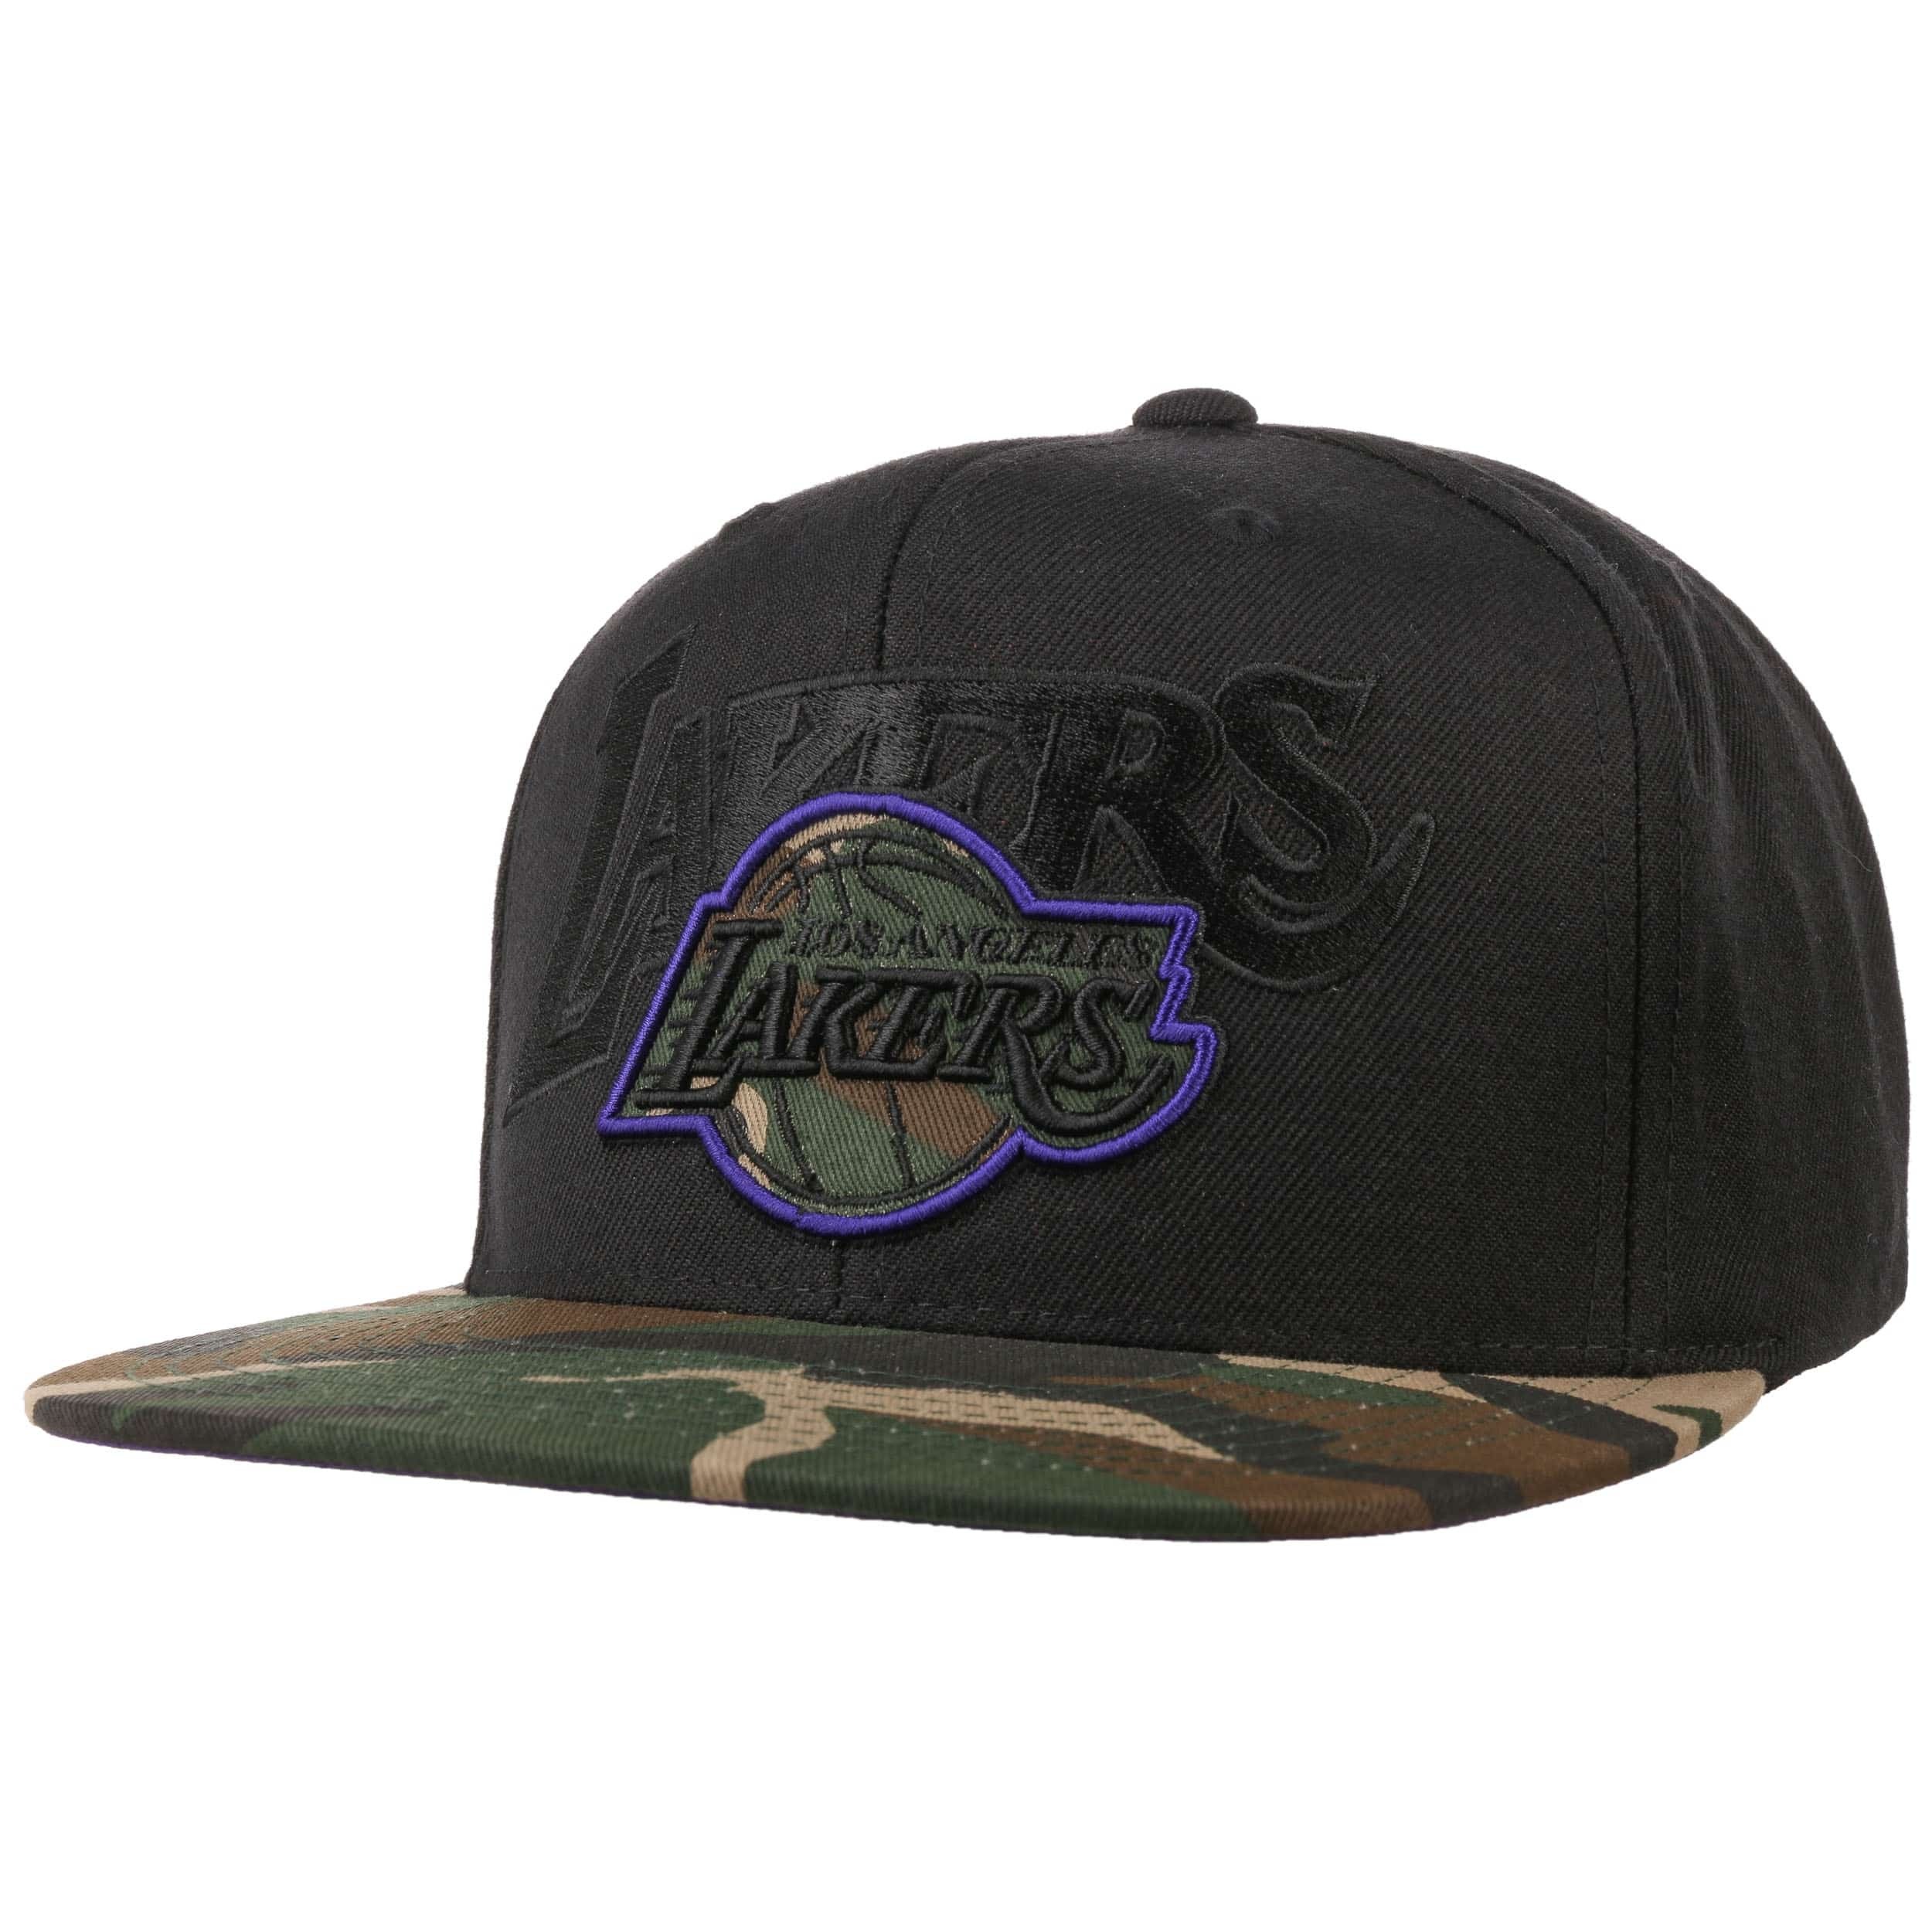 Camo Brim Lakers Cap by Mitchell & Ness - 37,95